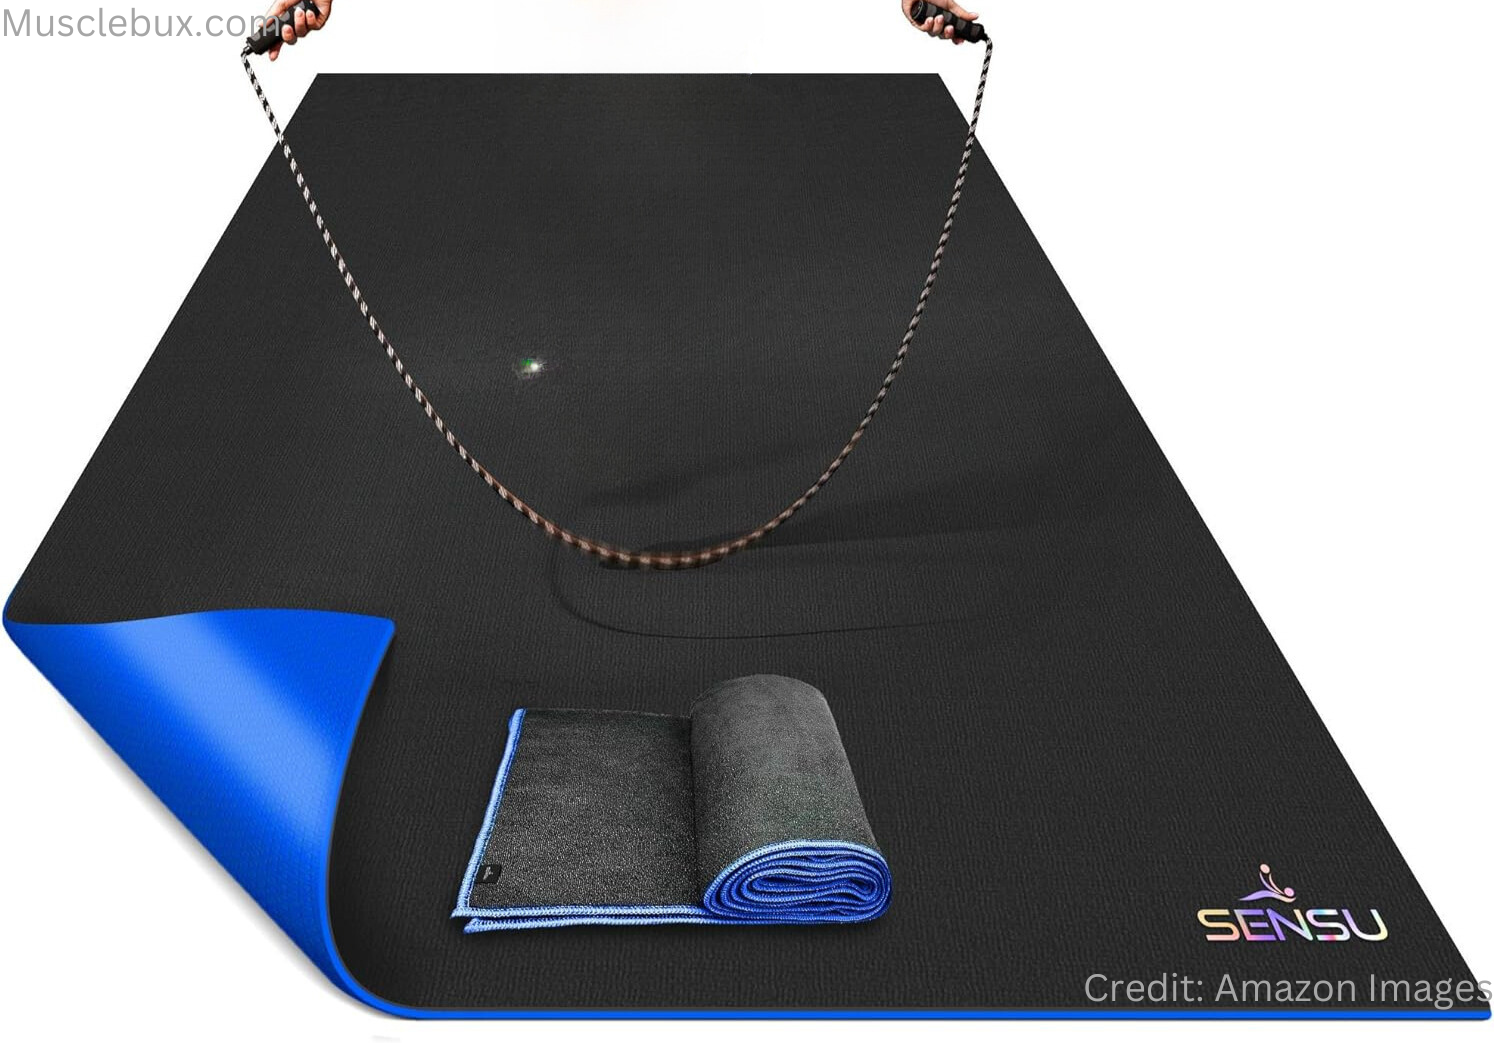 Best large HIIT exercise mat